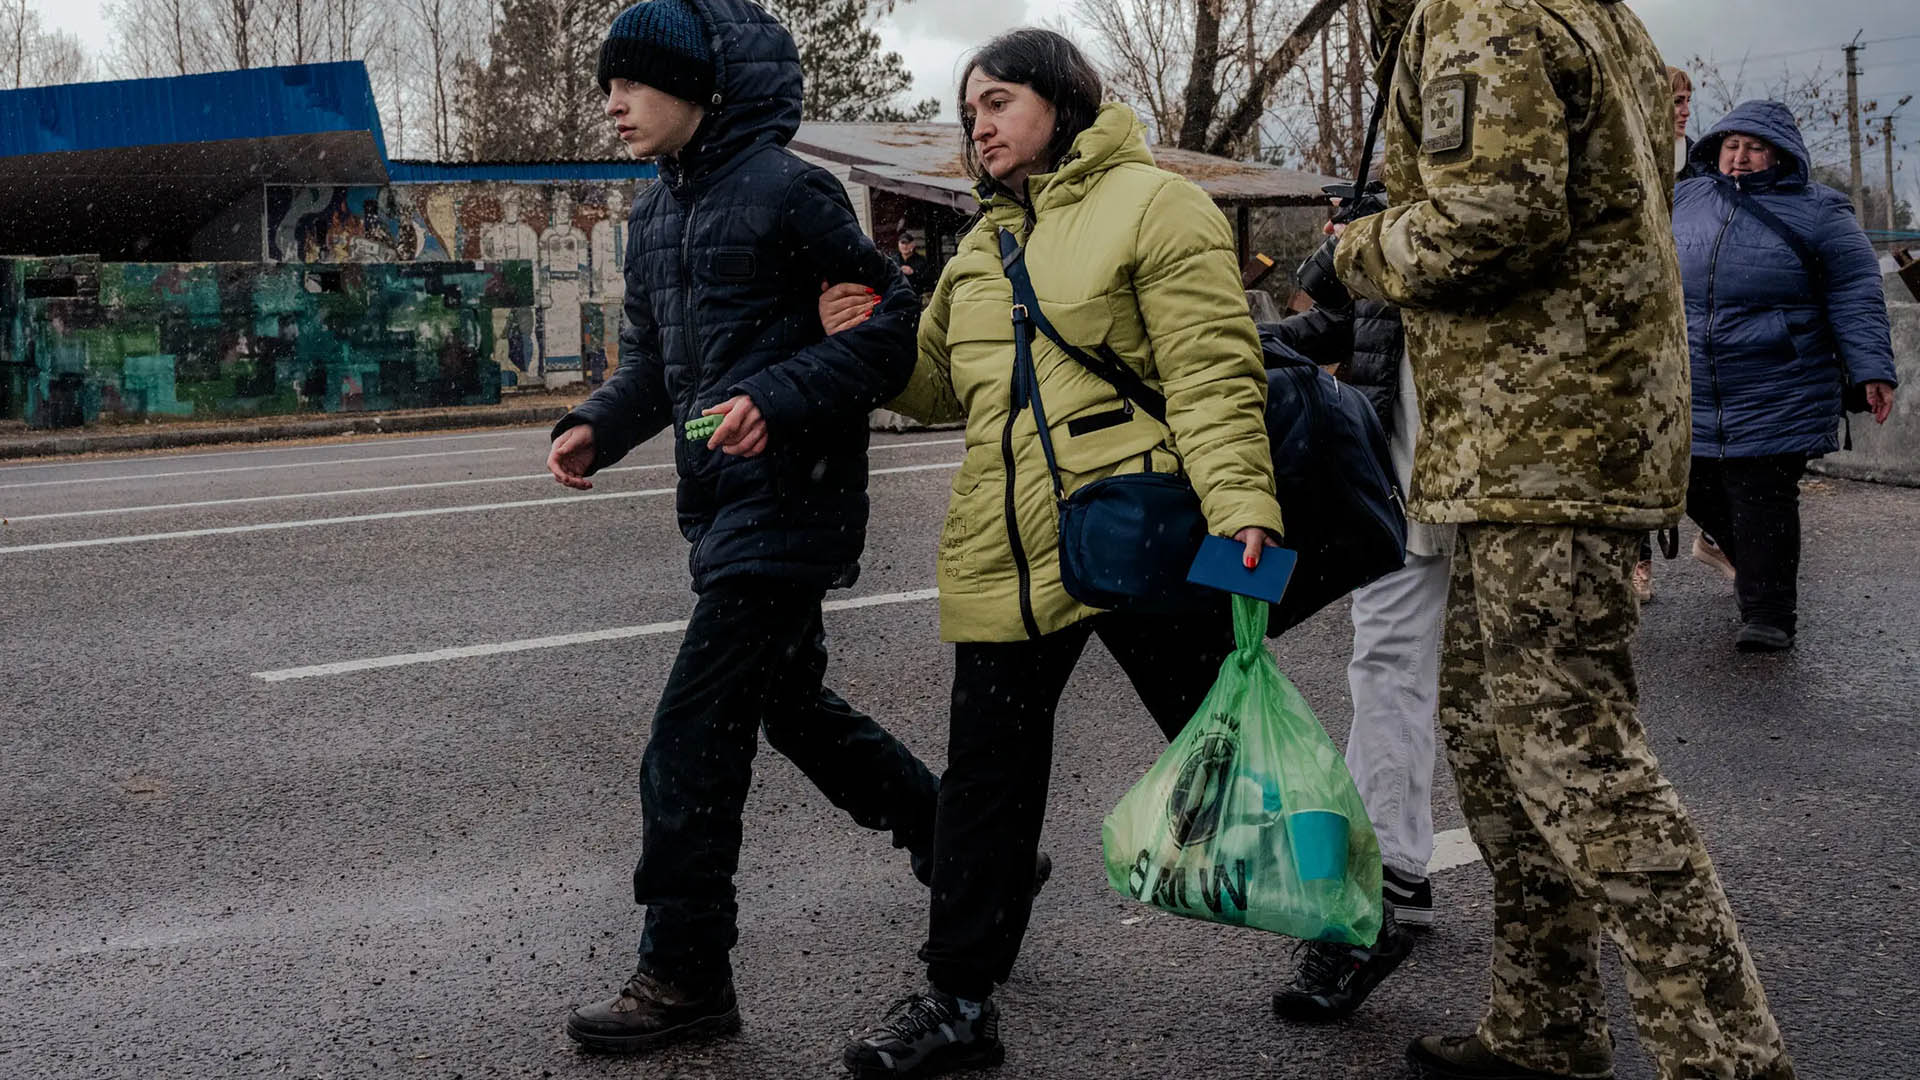 Olha Mazur with her son, Oleksandr Chugunov, after crossing the border from Belarus into Ukraine, in Volyn Oblast, Ukraine, on March 21, 2023. (Daniel Berehulak/The New York Times)